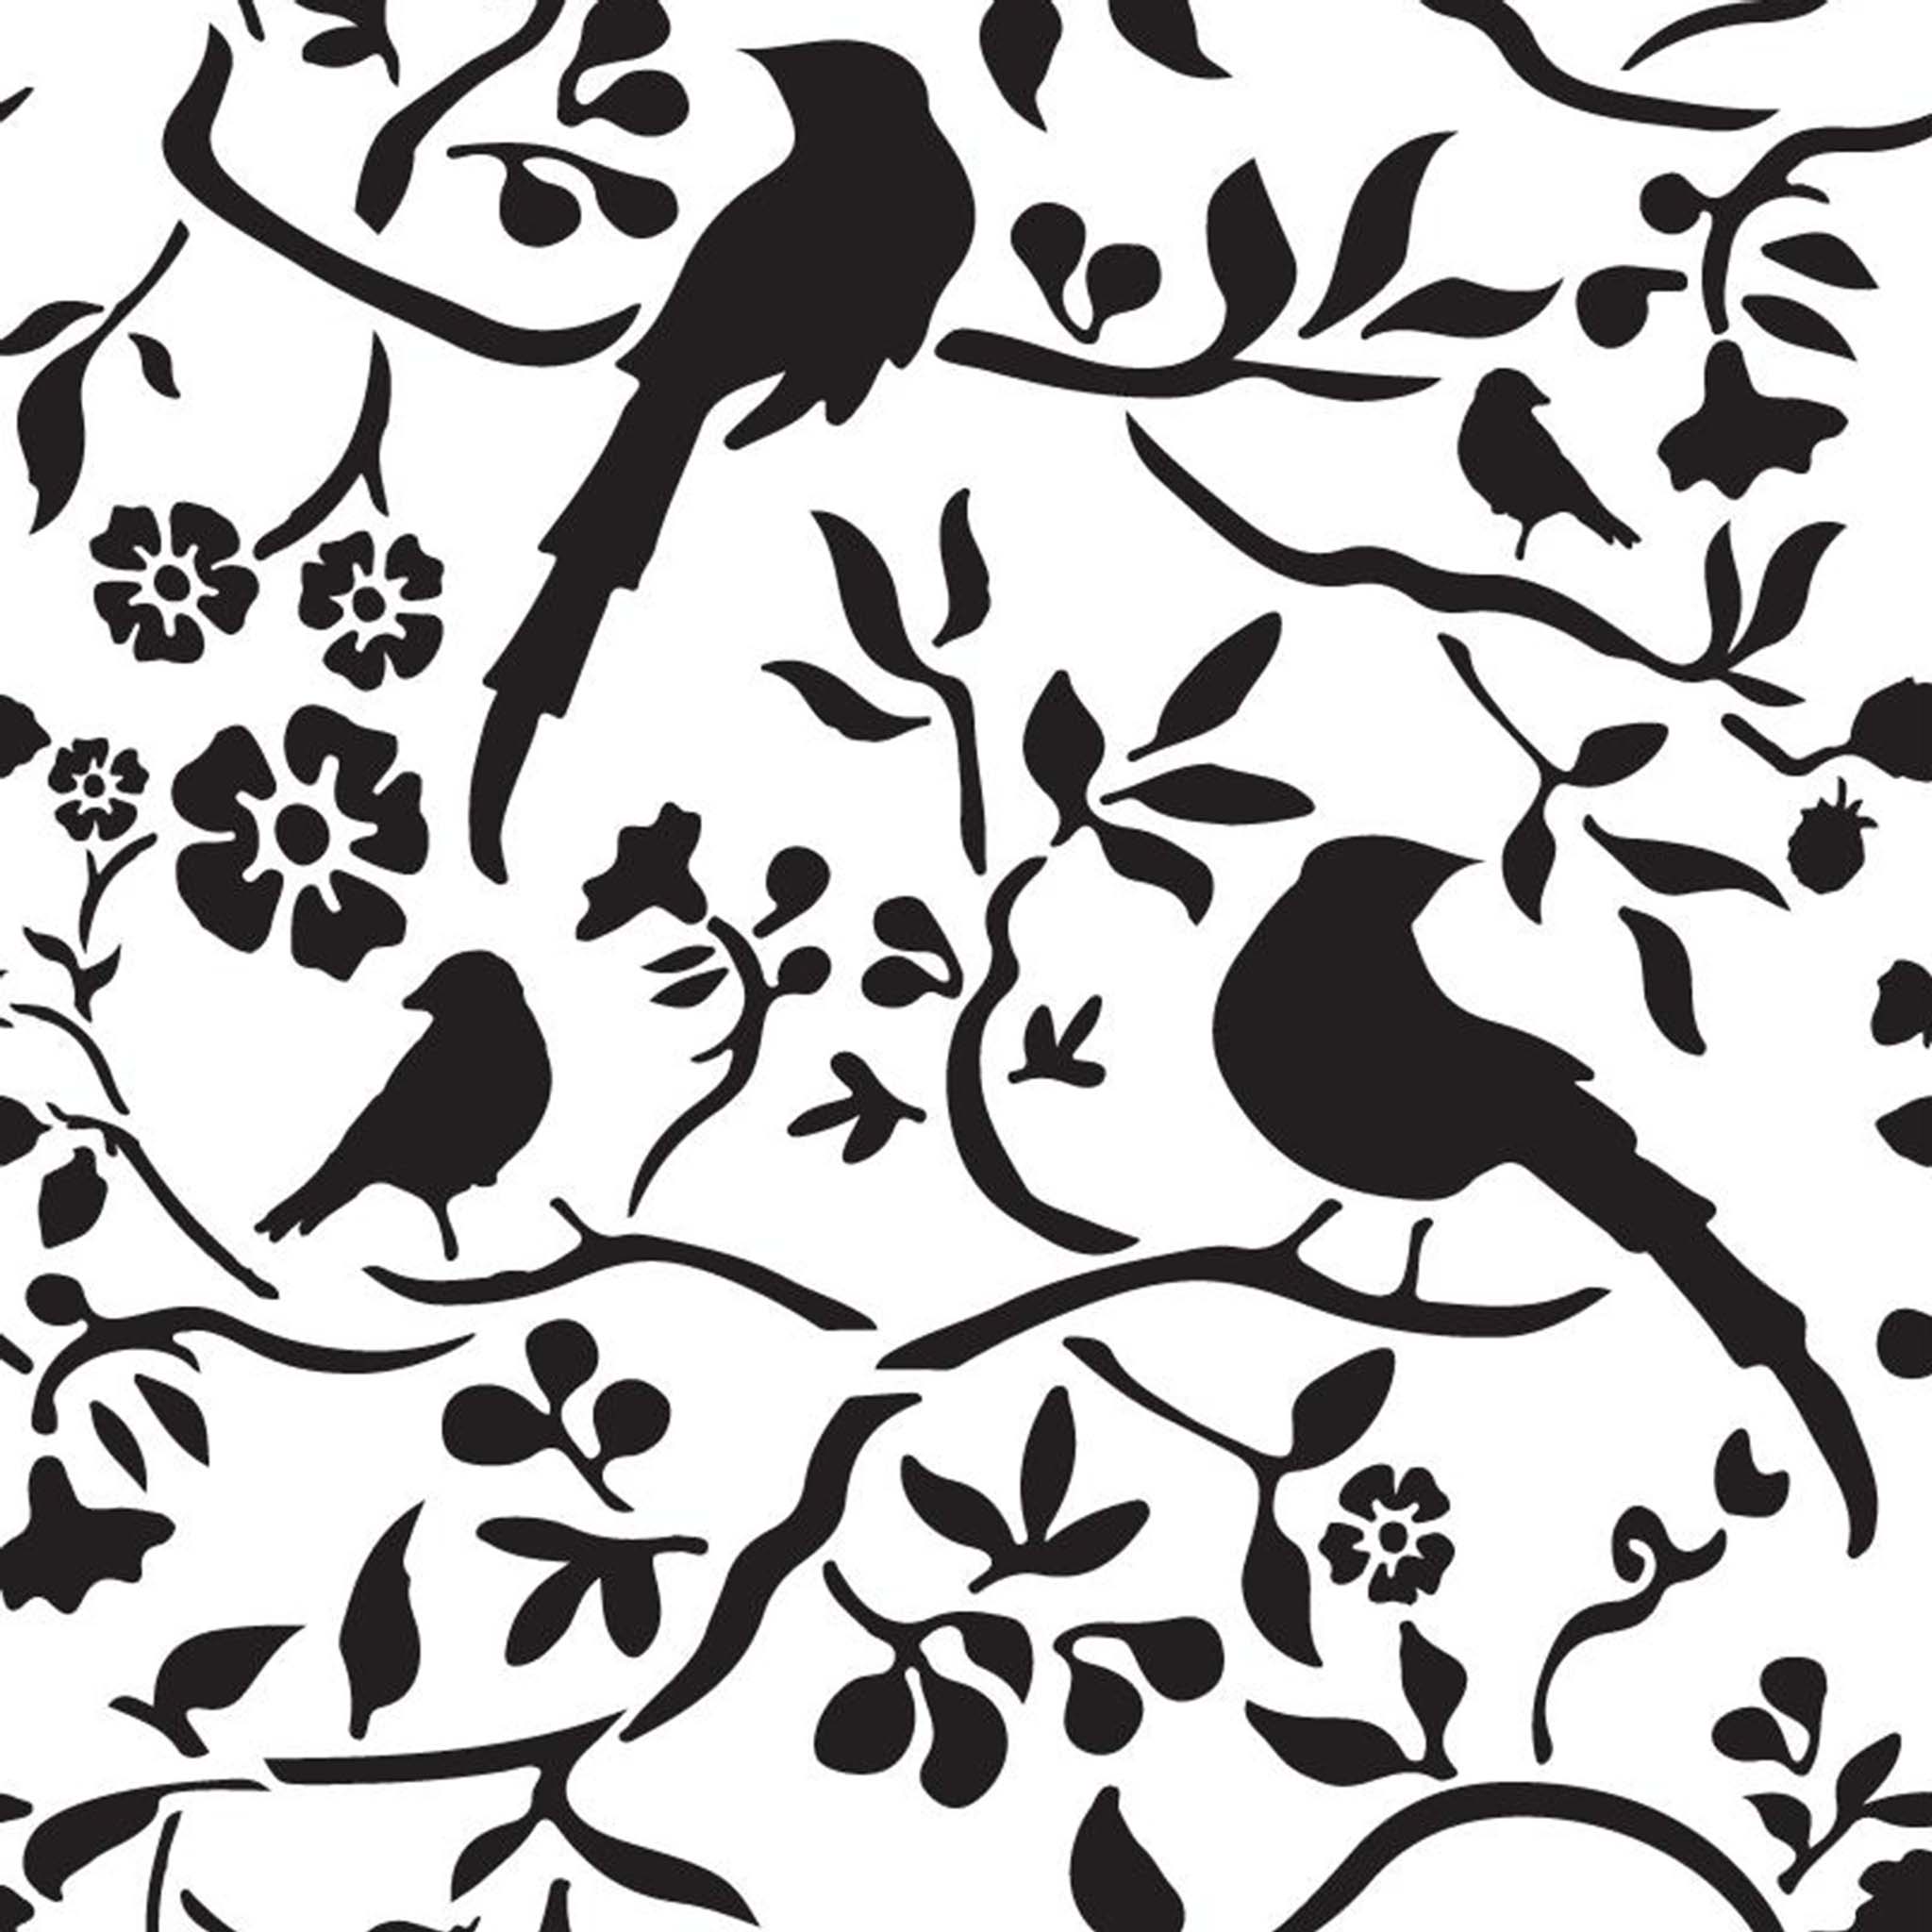 Tree with Birds Stencil - Art and Wall Stencil